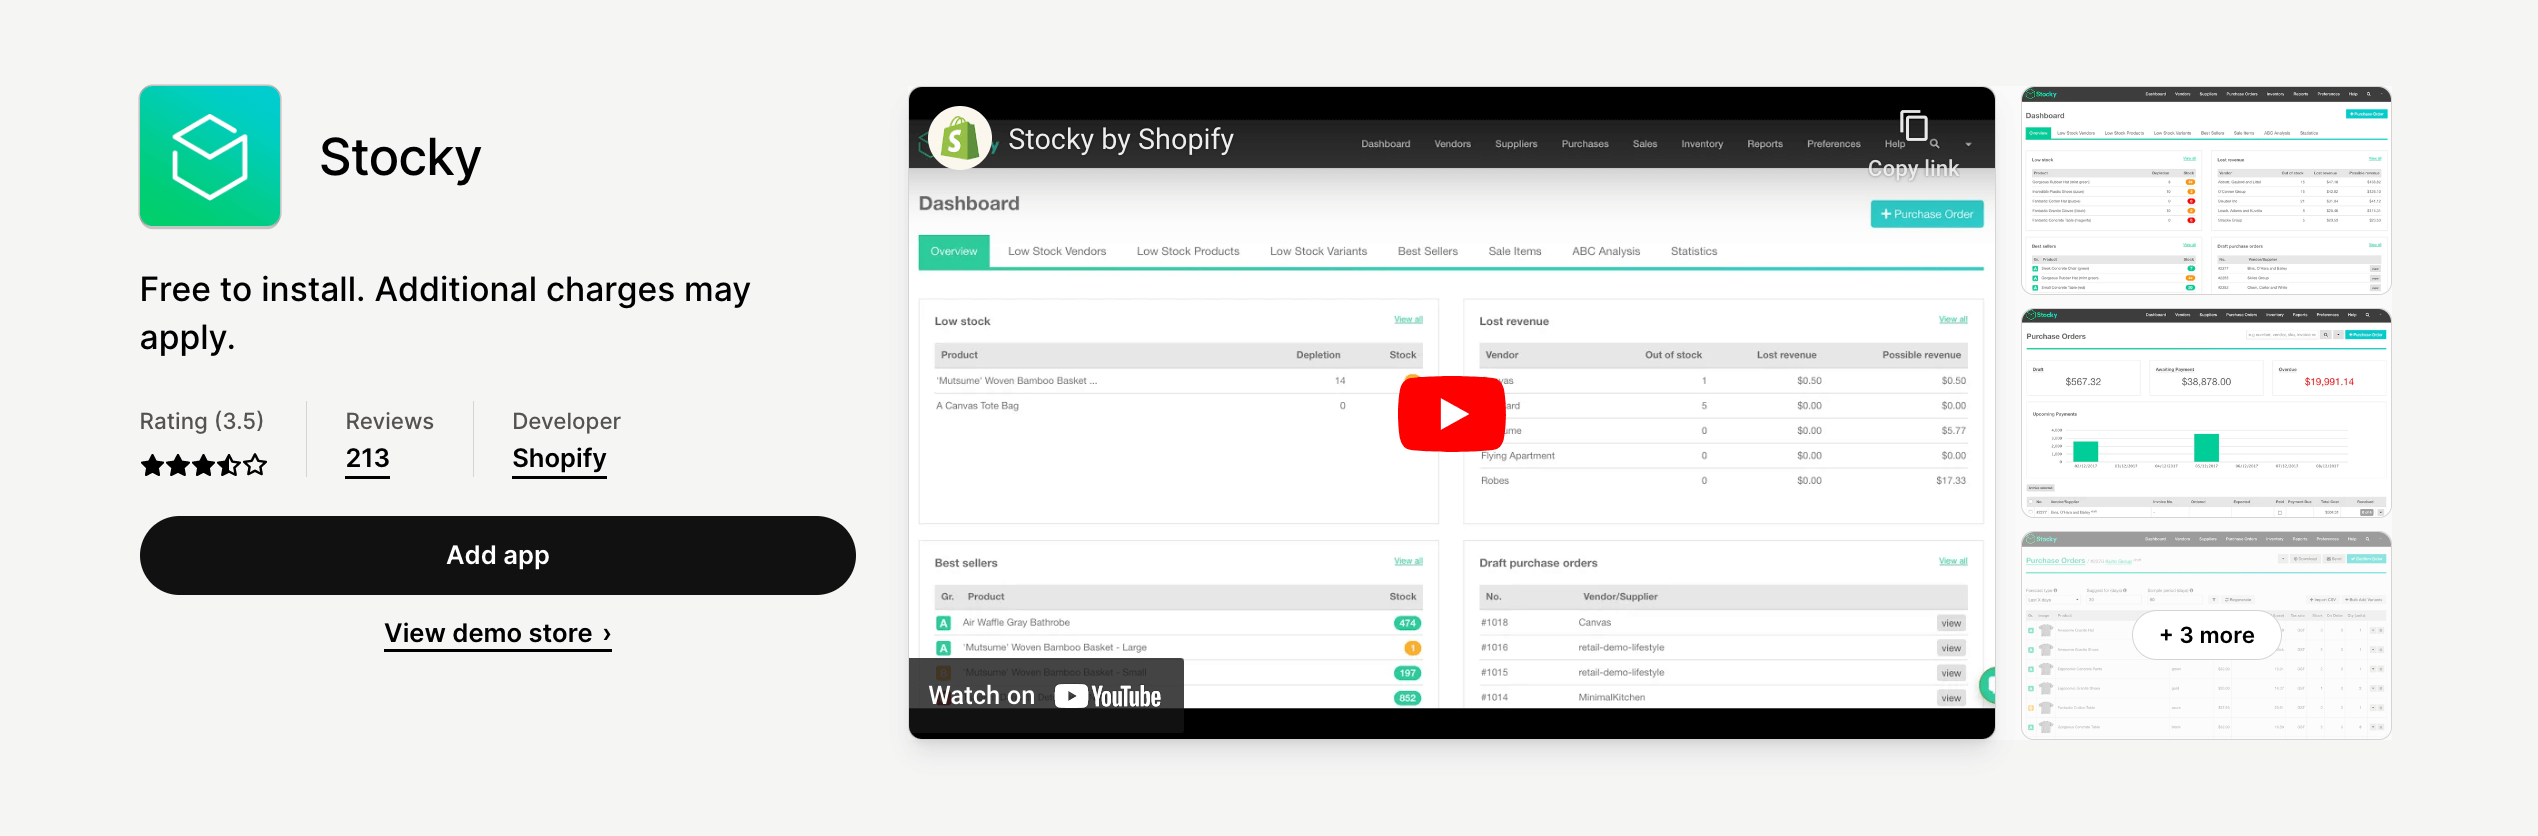 Stocky in Shopify App Store